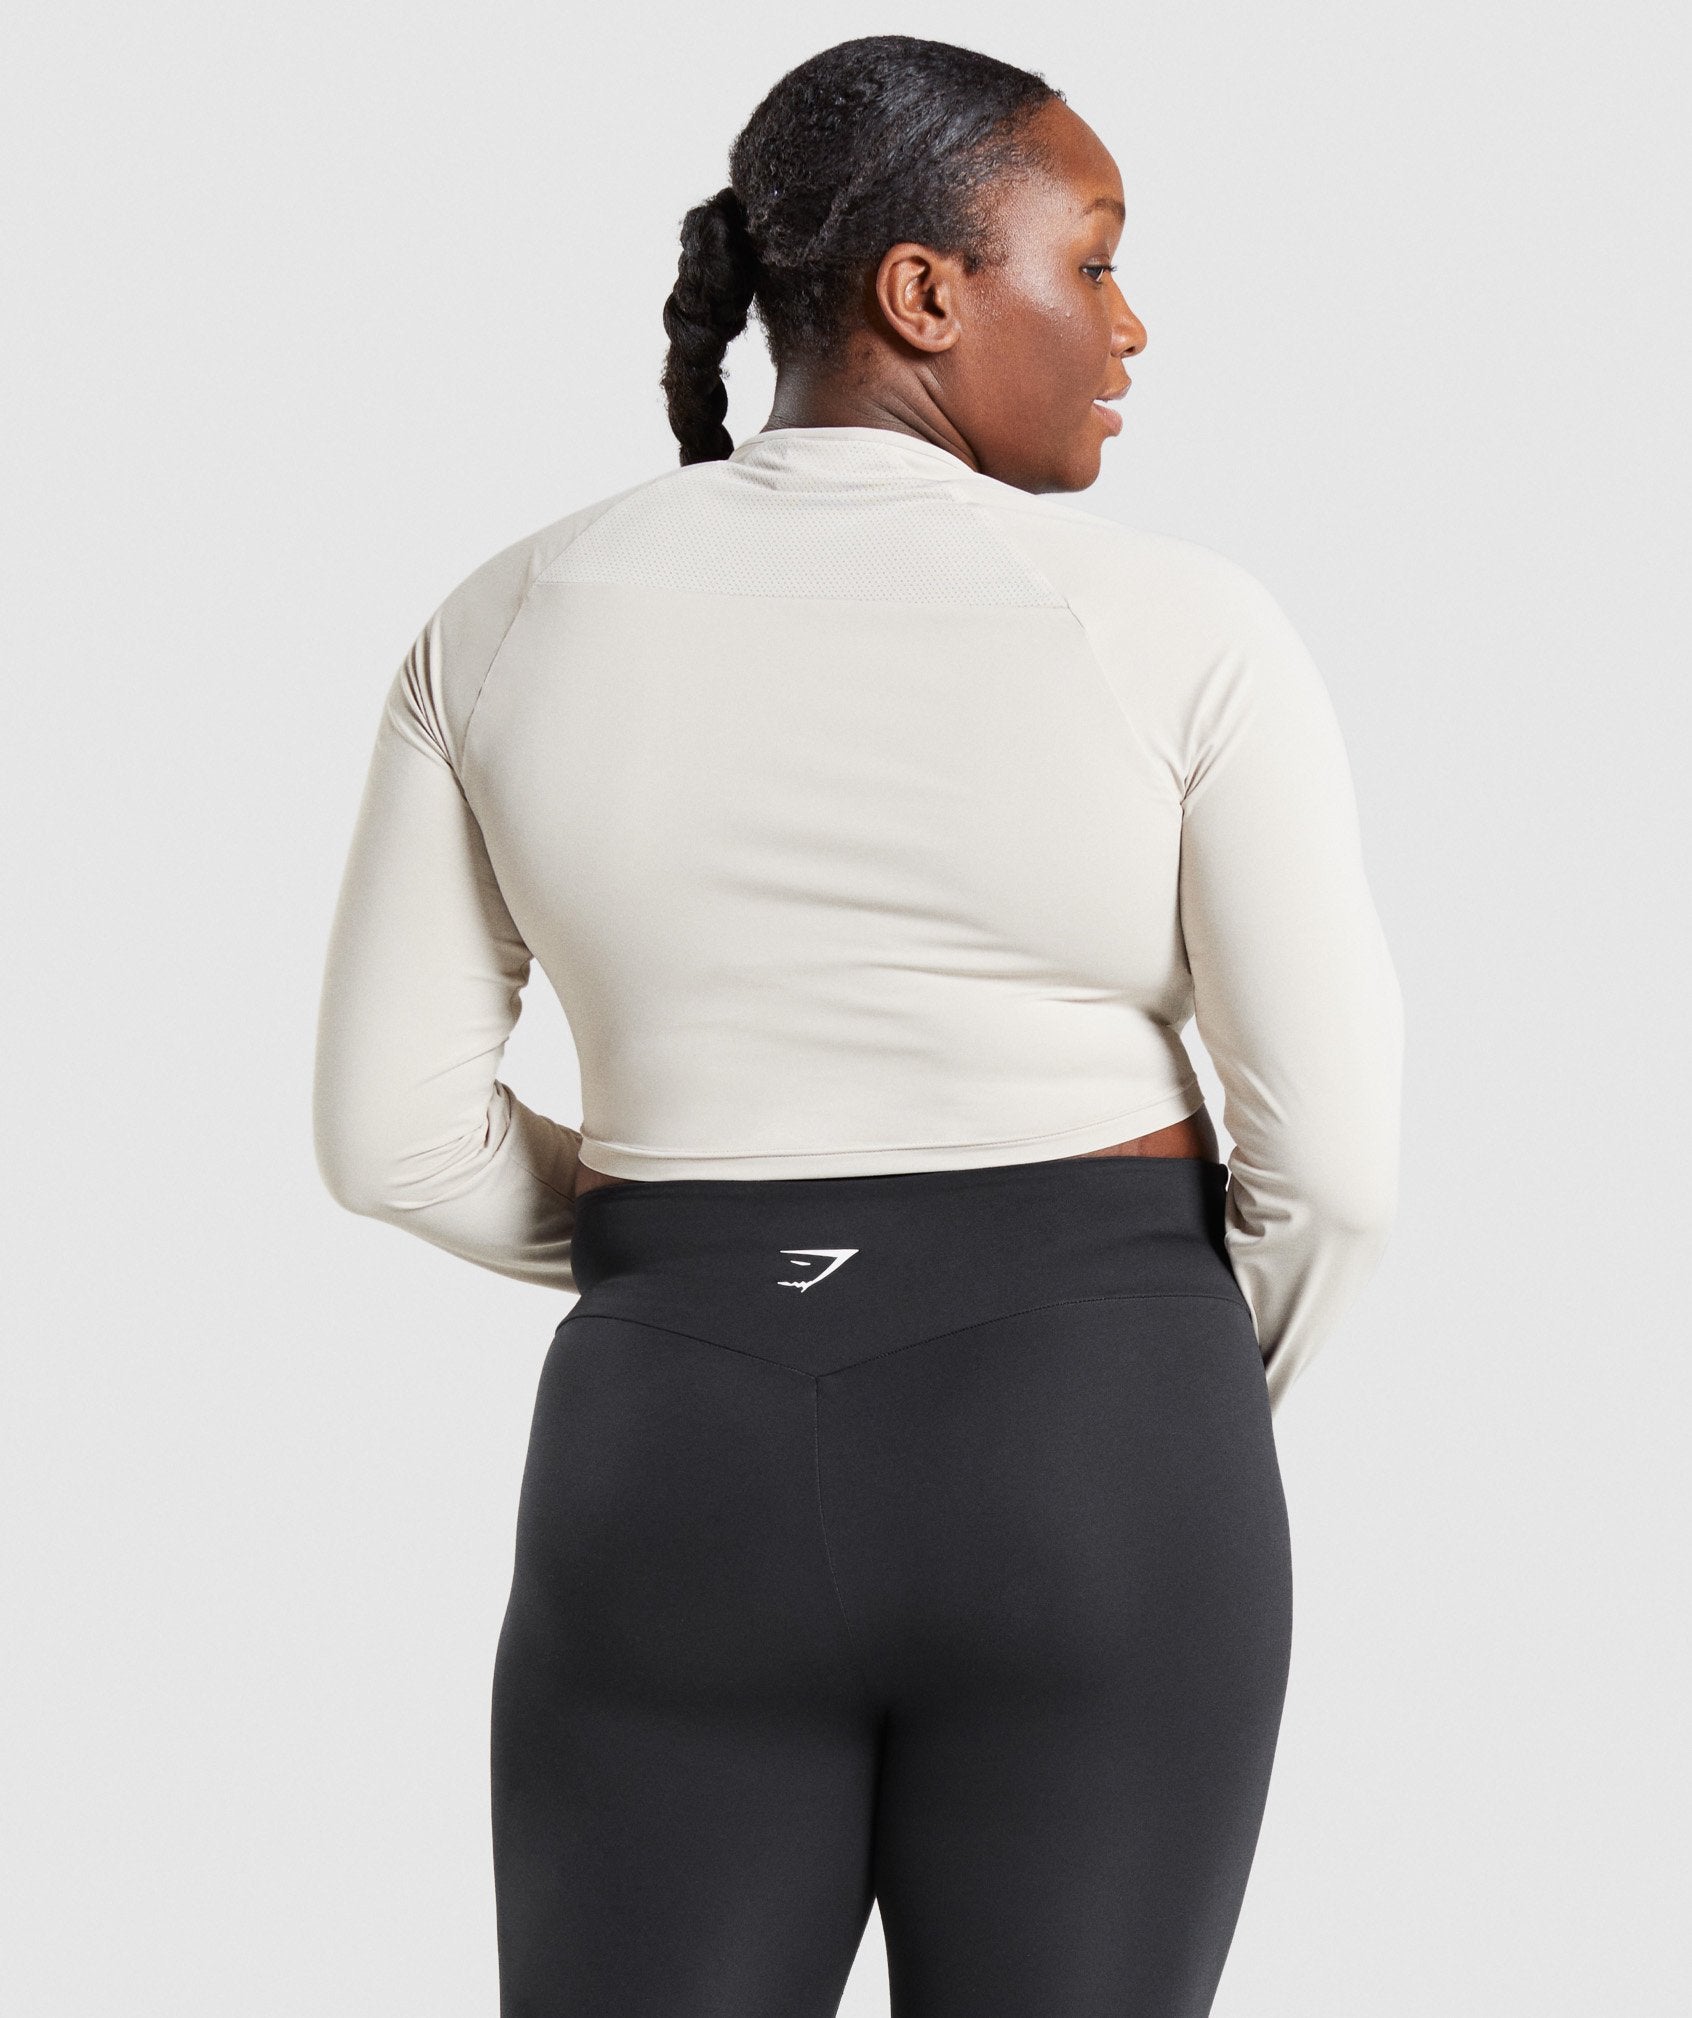 Image B shows back of model wearing Training Long Sleeve Crop Top in Grey